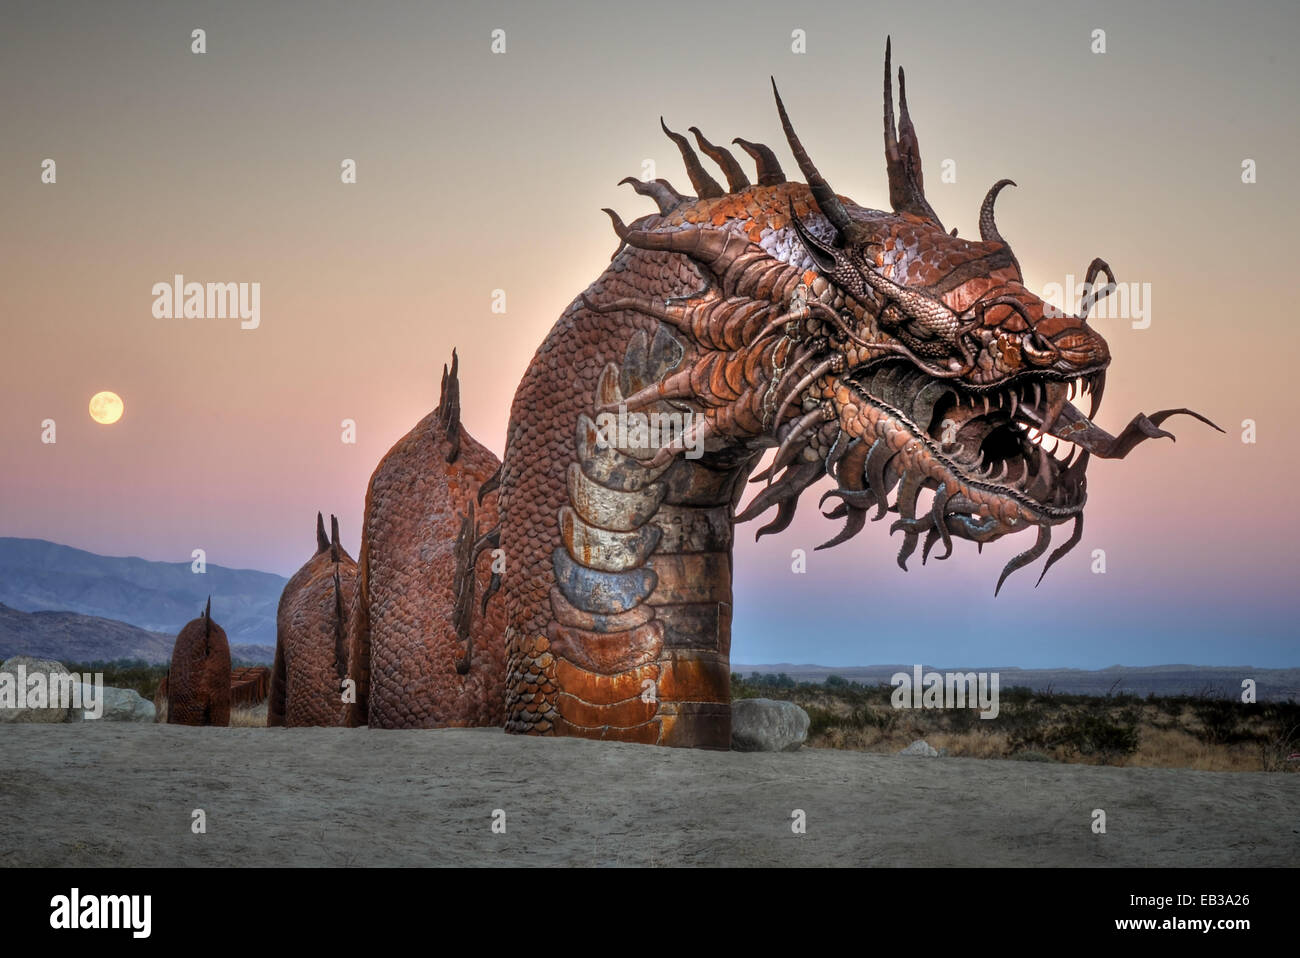 Sculpture of dragon in desert with rising full moon in background, Borrego Springs, California, USA Stock Photo